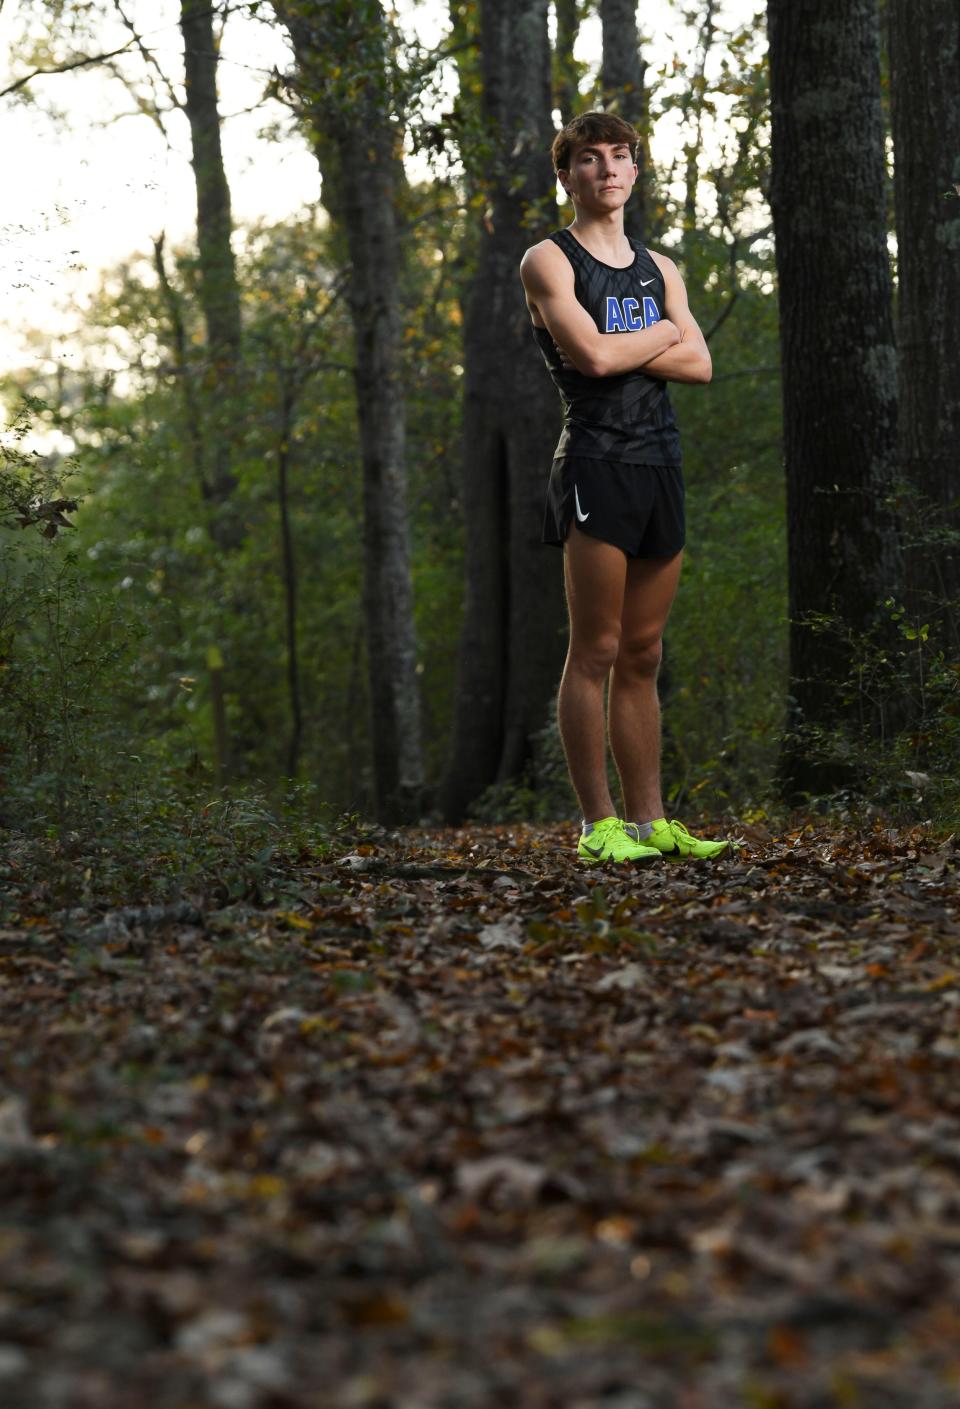 American Christian's Cole Byers is the Tuscaloosa News All-Area boys cross country athlete of the year.